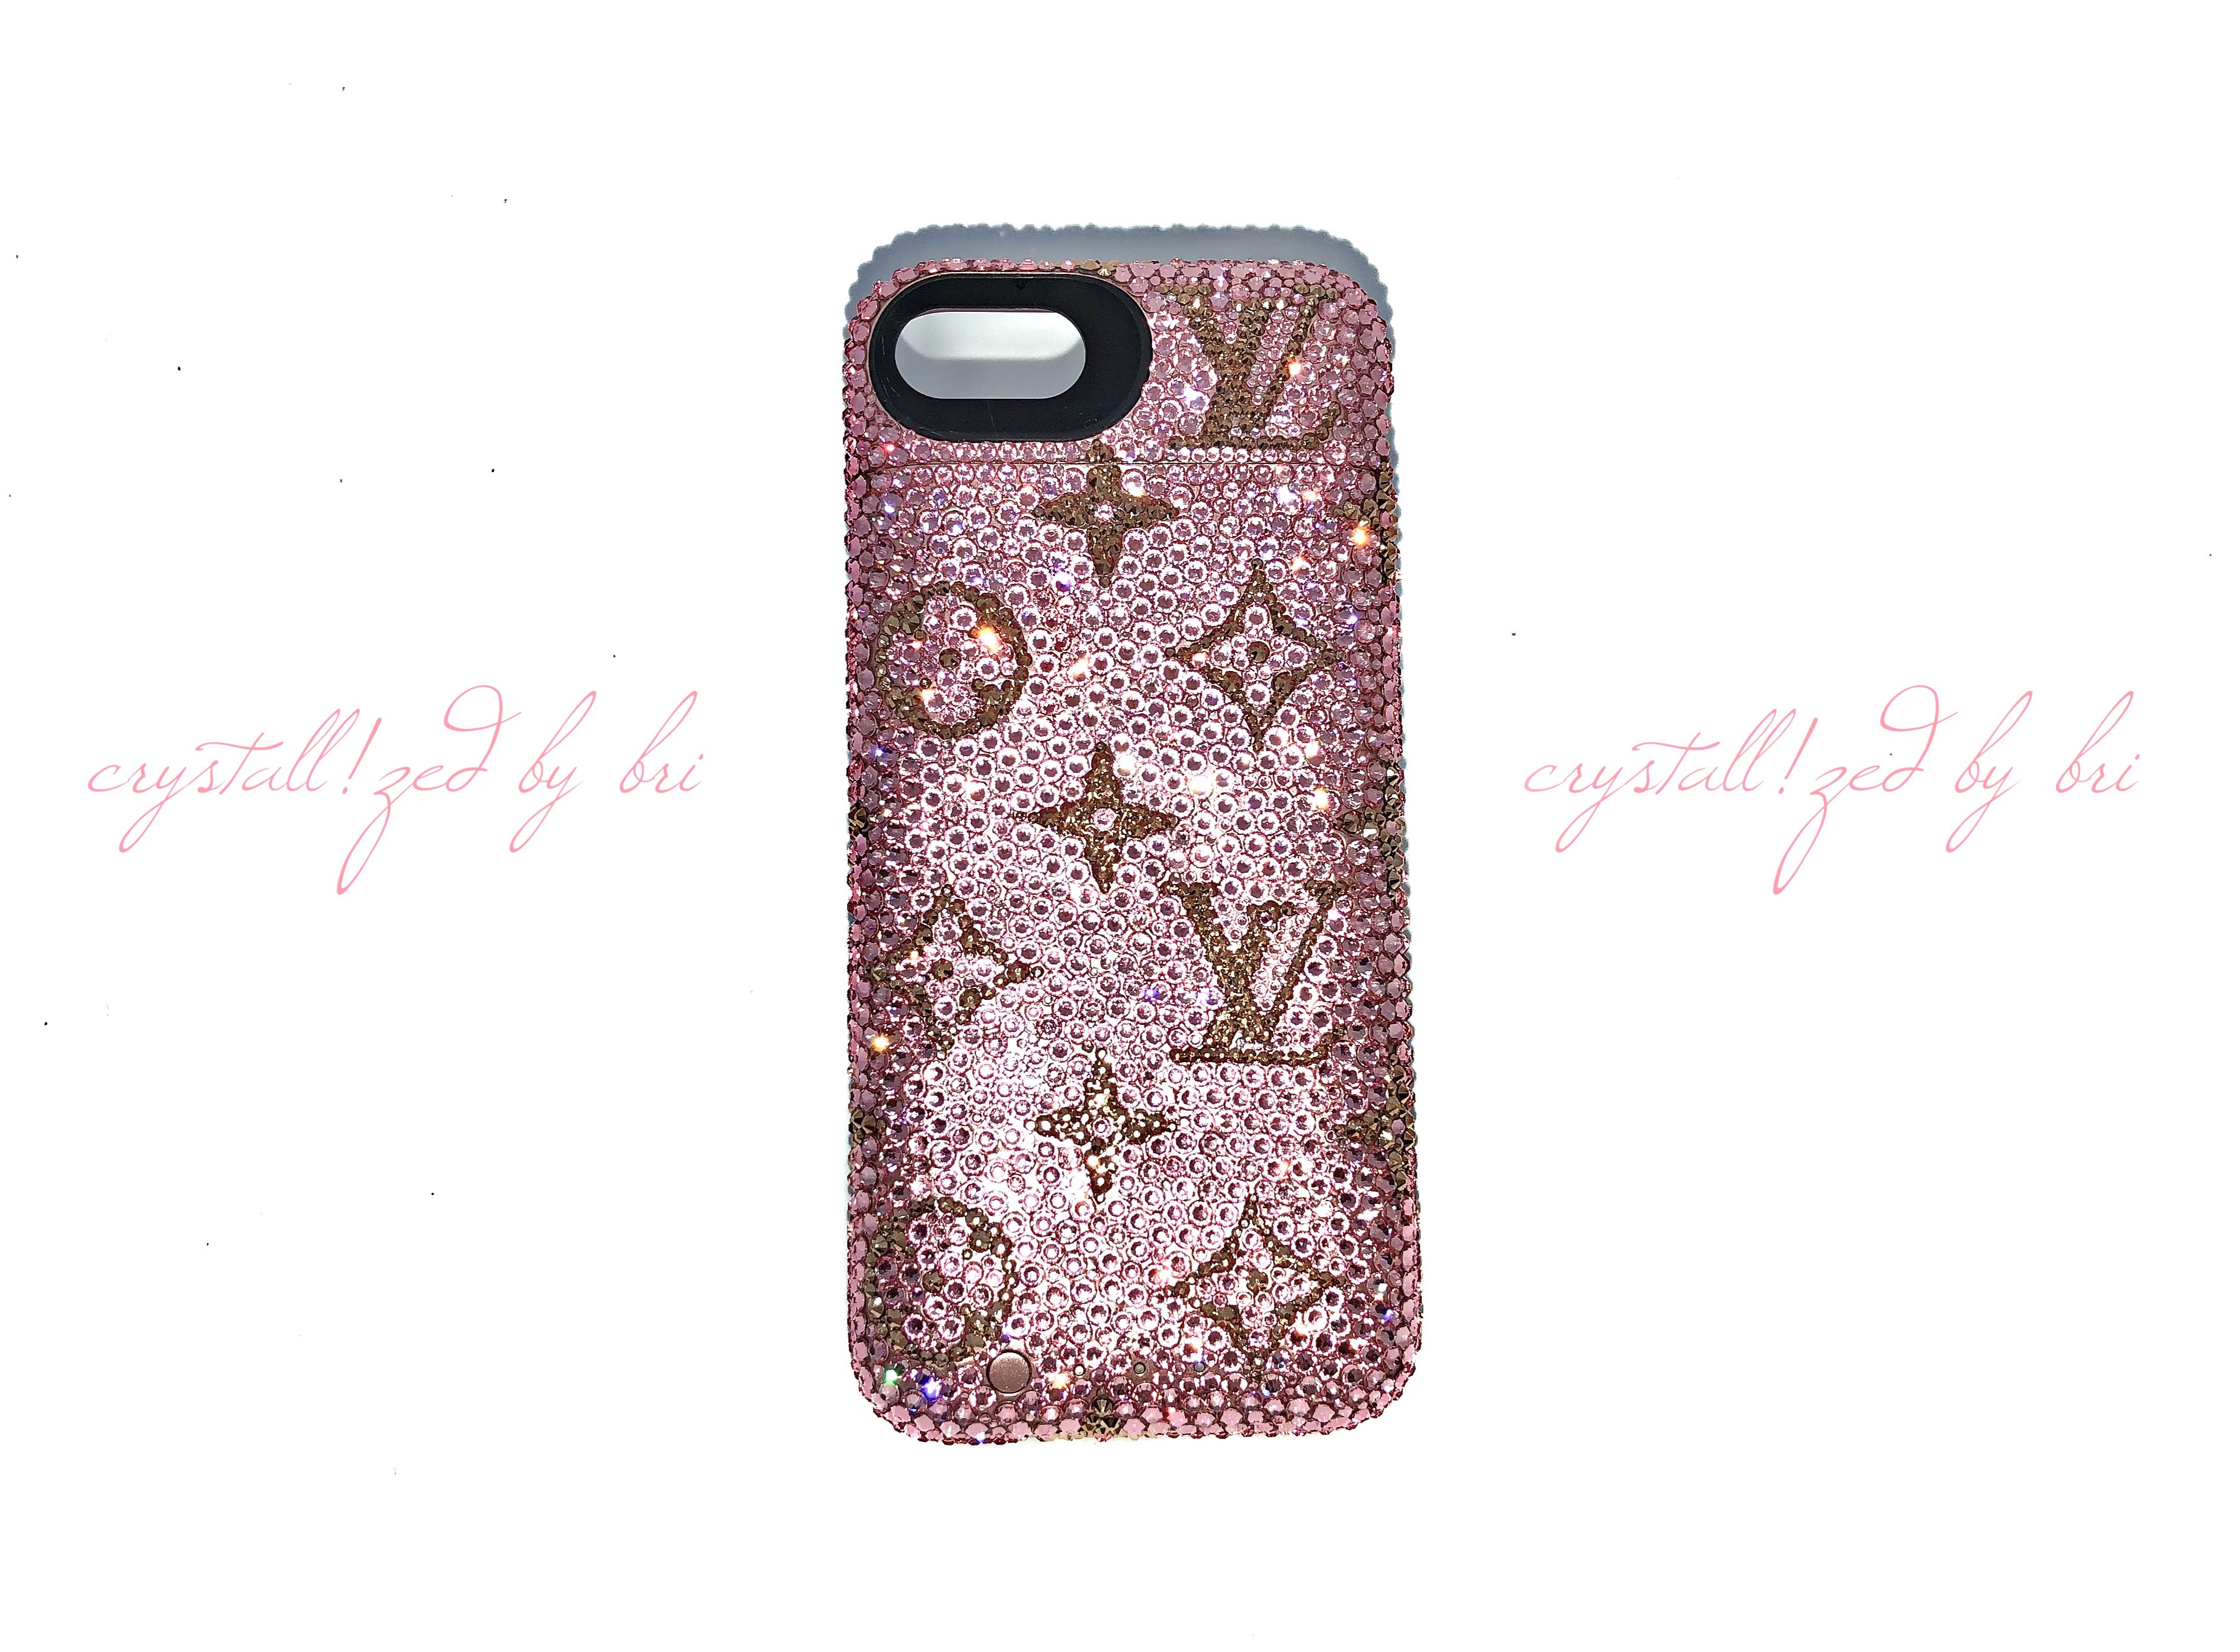 Buy Hand Crafted Lv Crystallized Iphone Case Any Cell Phone Bling Genuine  European Crystals Bedazzled Louis Vuitton, made to order from CRYSTALL!ZED  by Bri, LLC